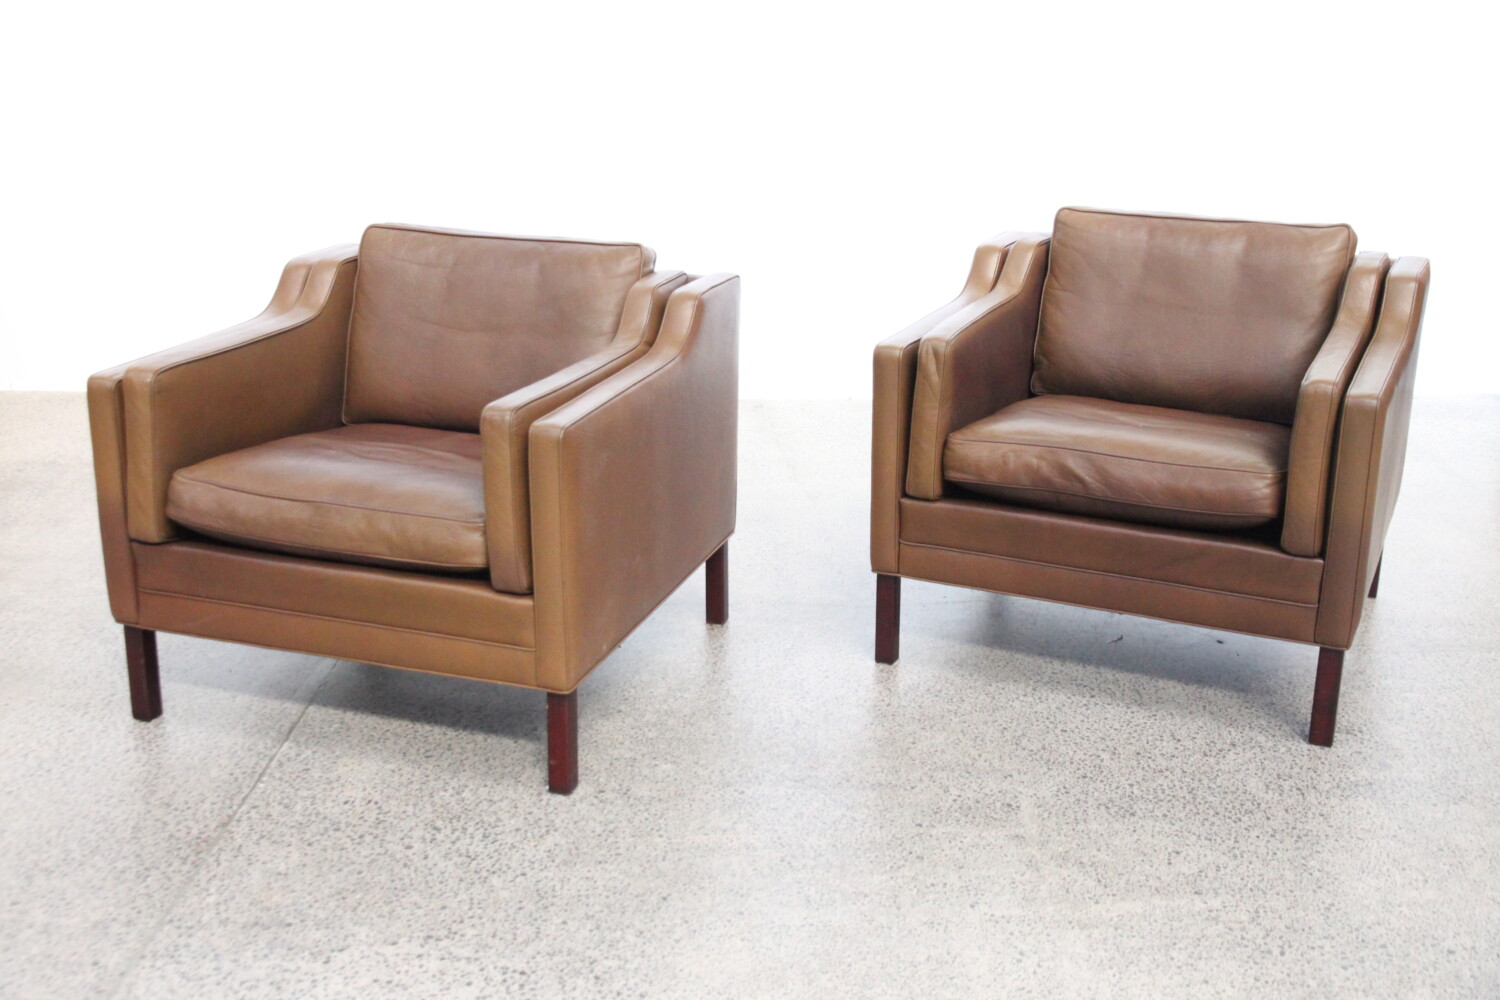 Pair of Leather Armchairs sold